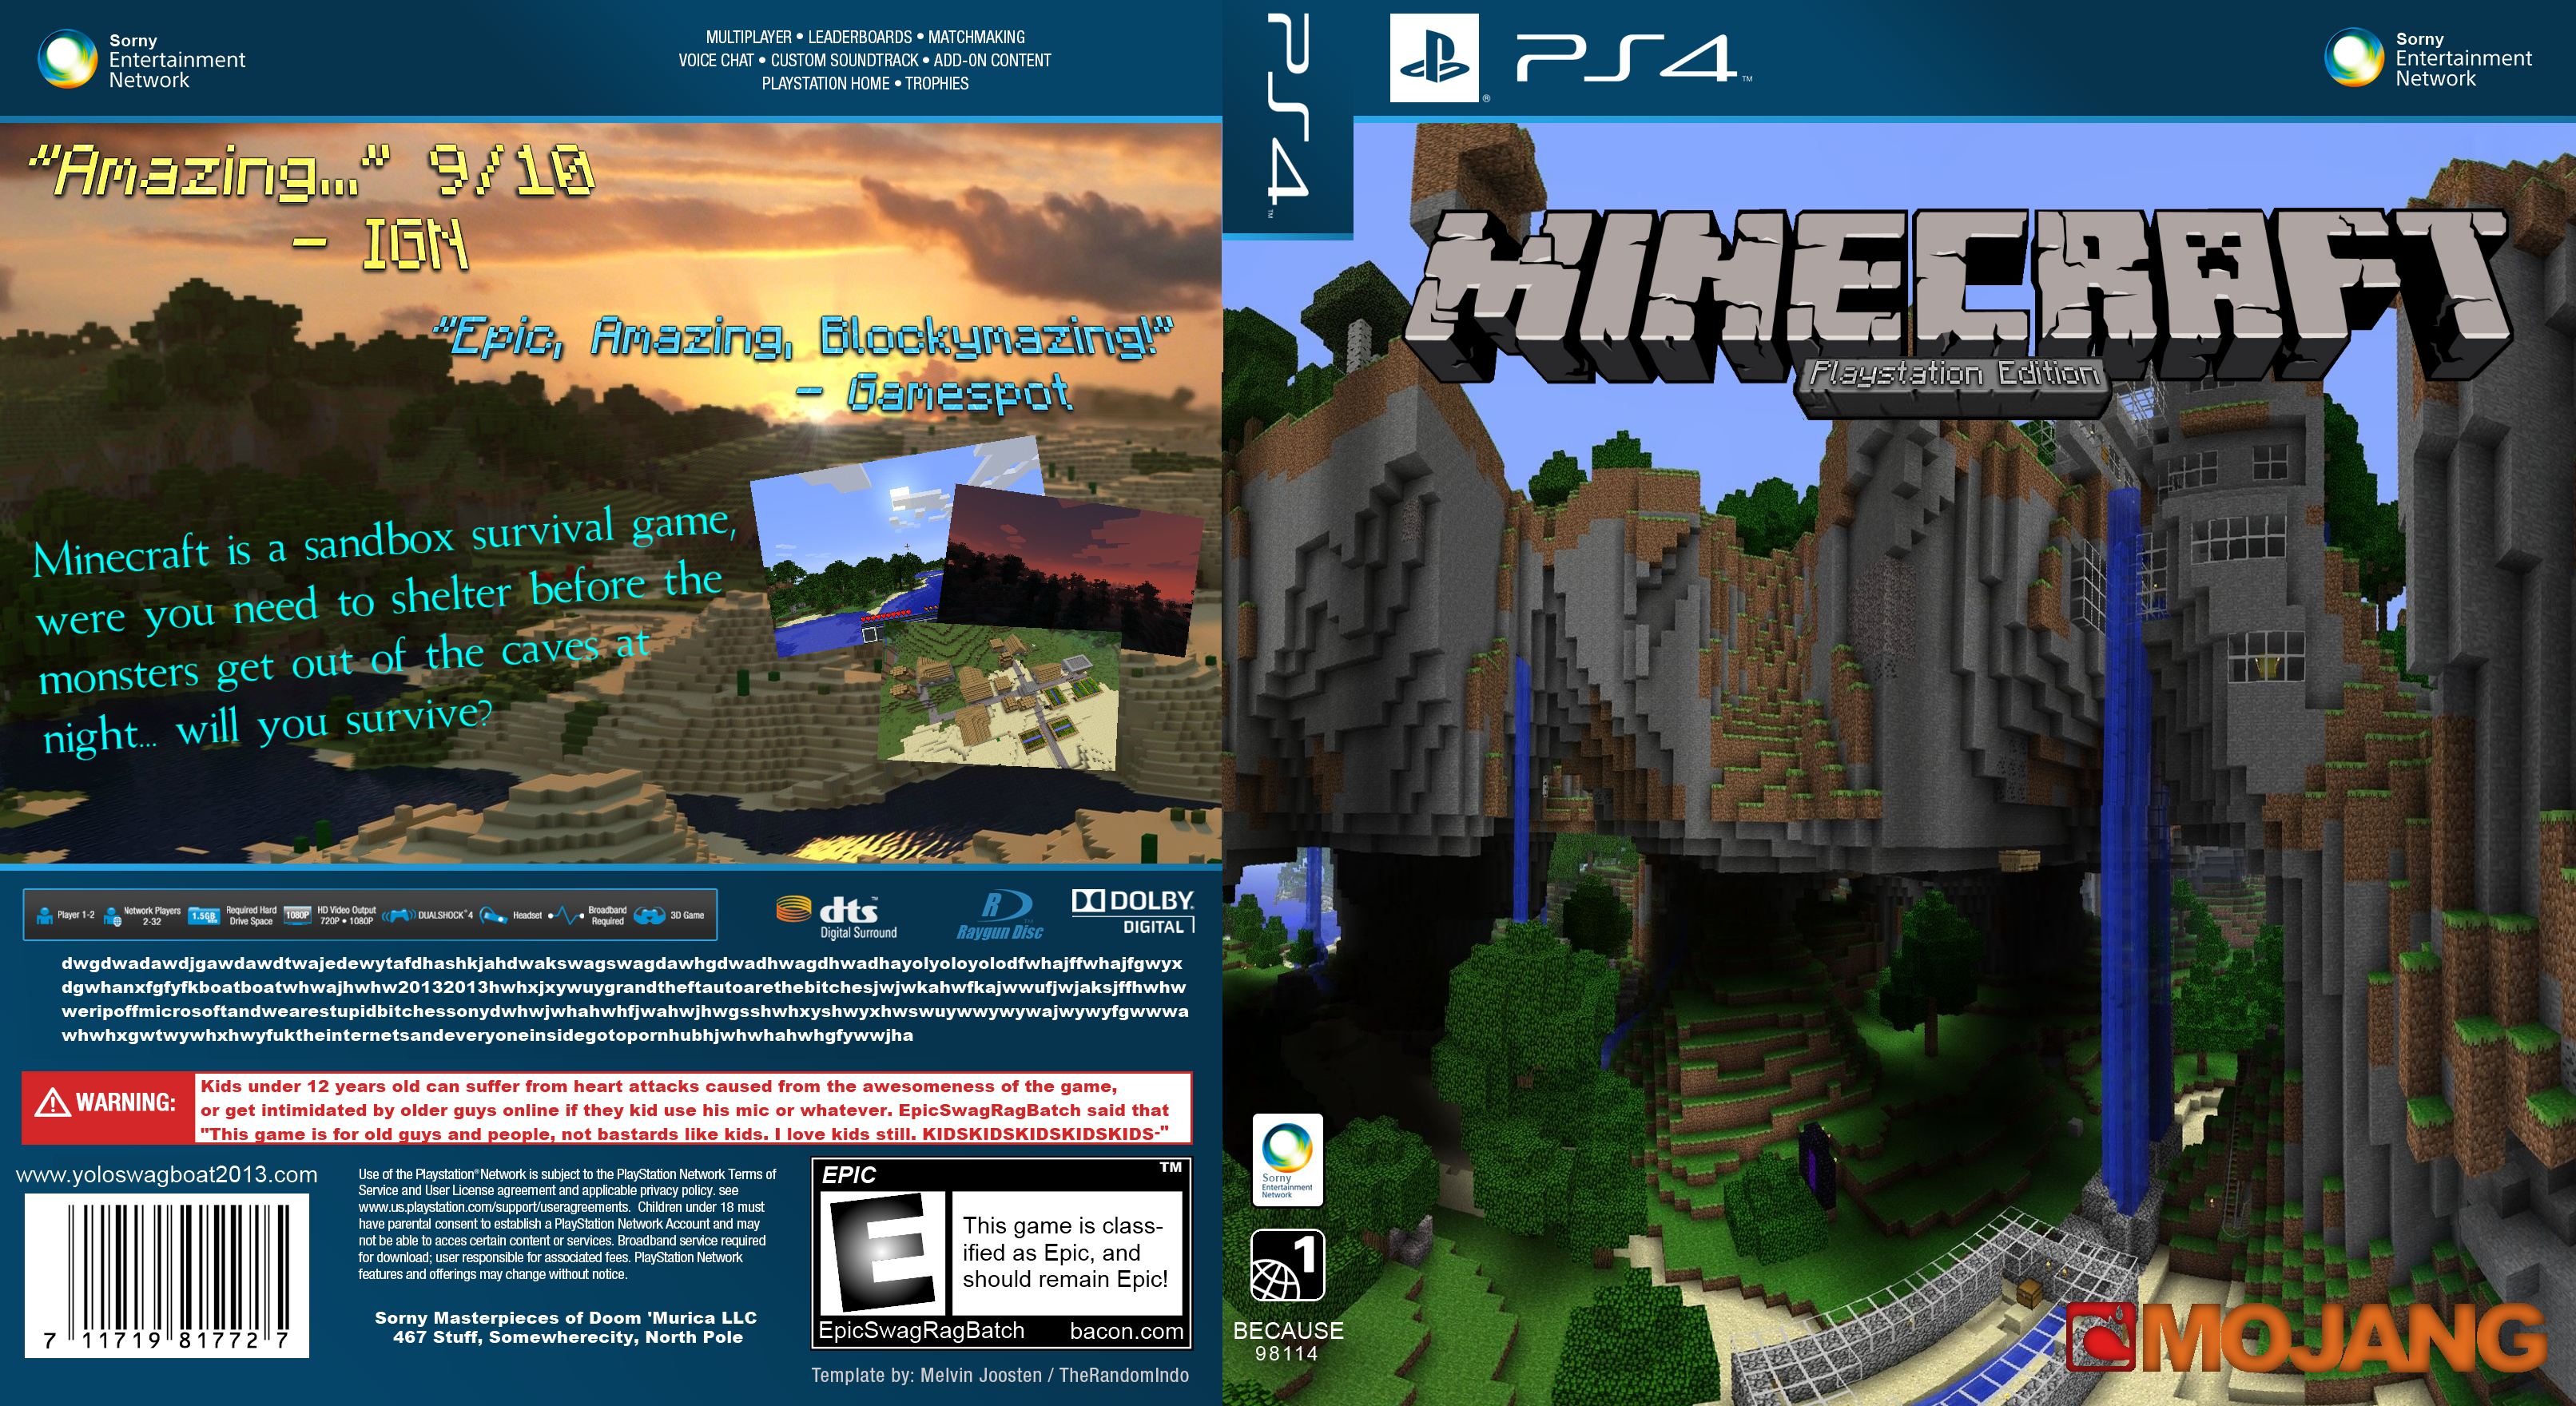 Minecraft: Playstation Edition box cover